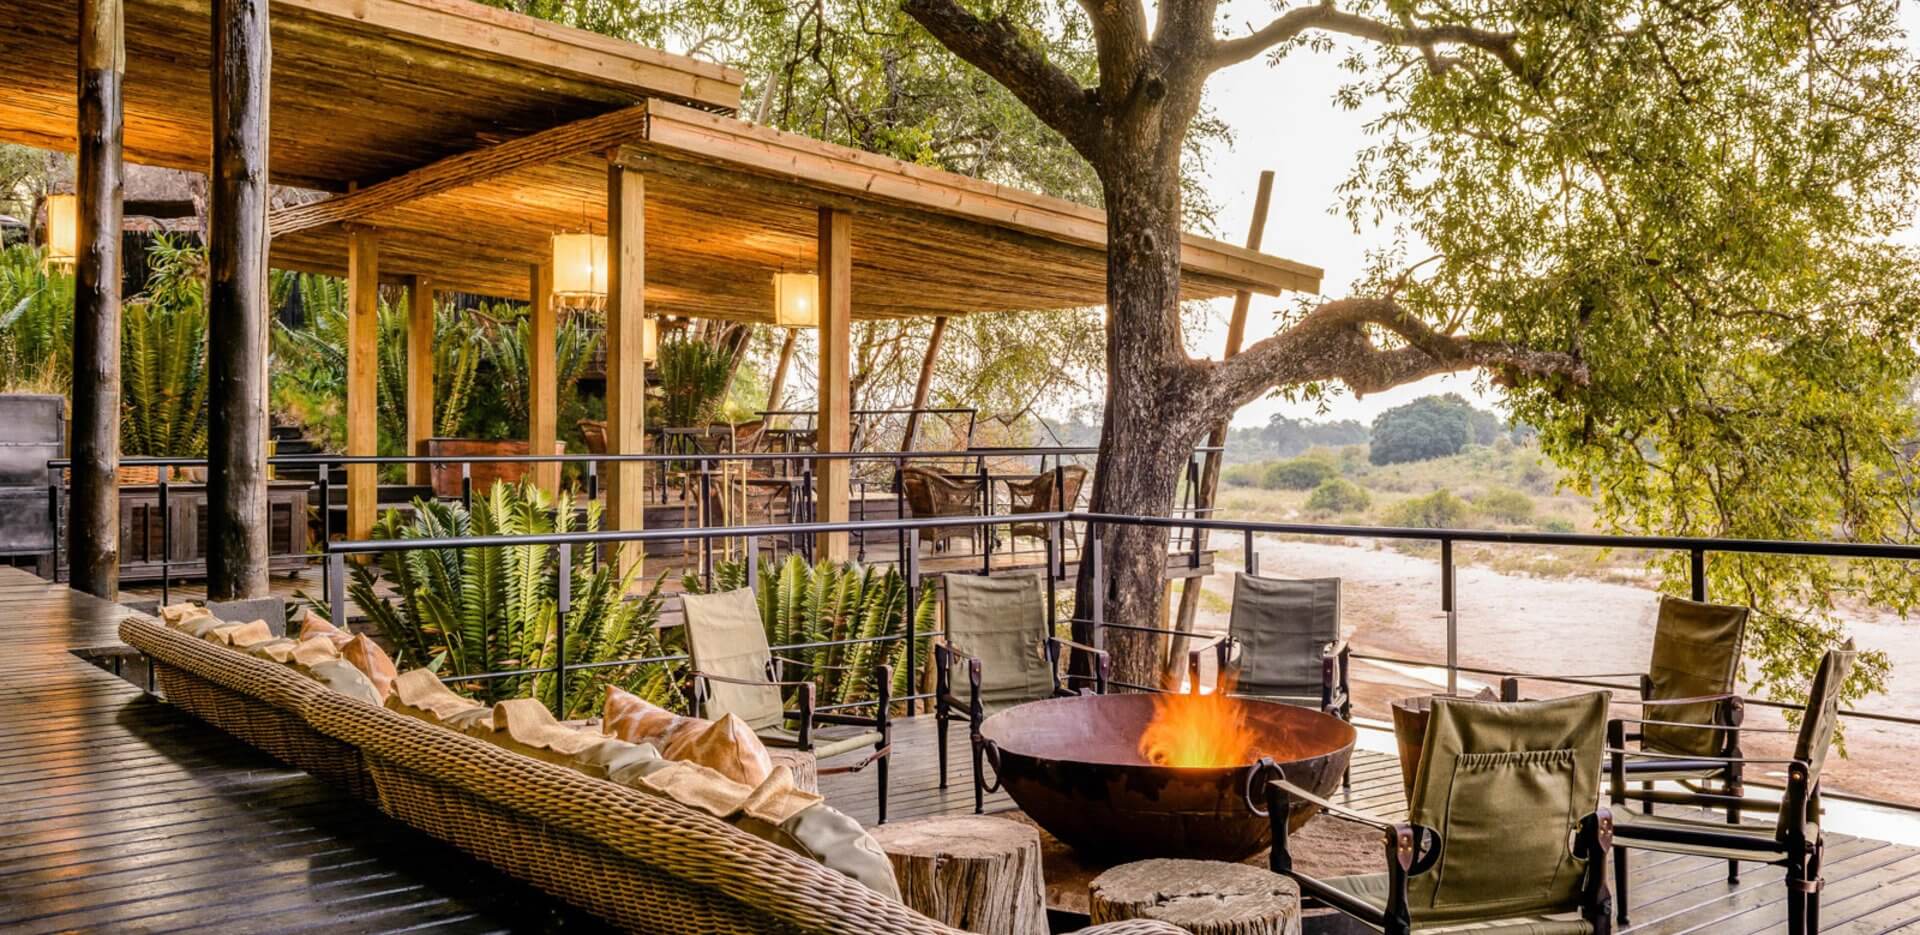 great accommodation on a South Africa safari holiday